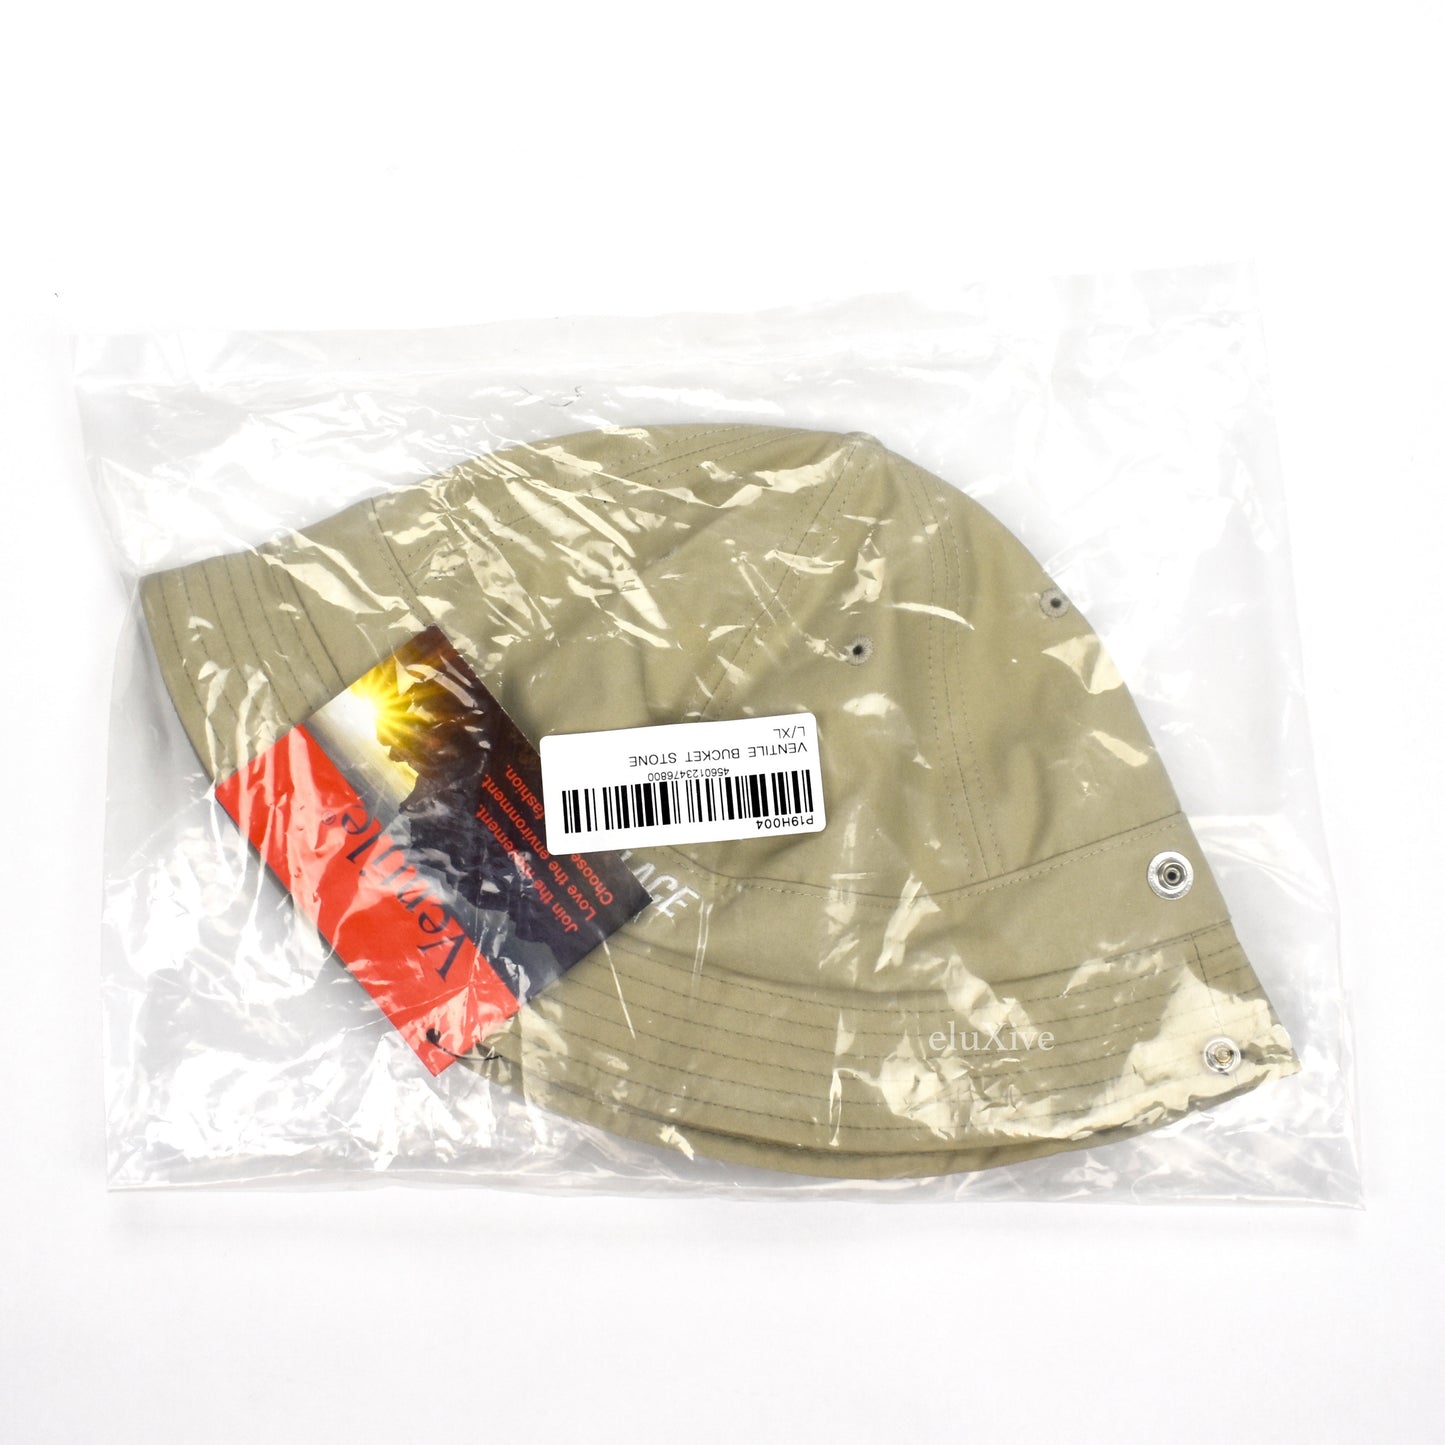 Palace - Ventile Logo Embroidered Bucket Hat (Stone)